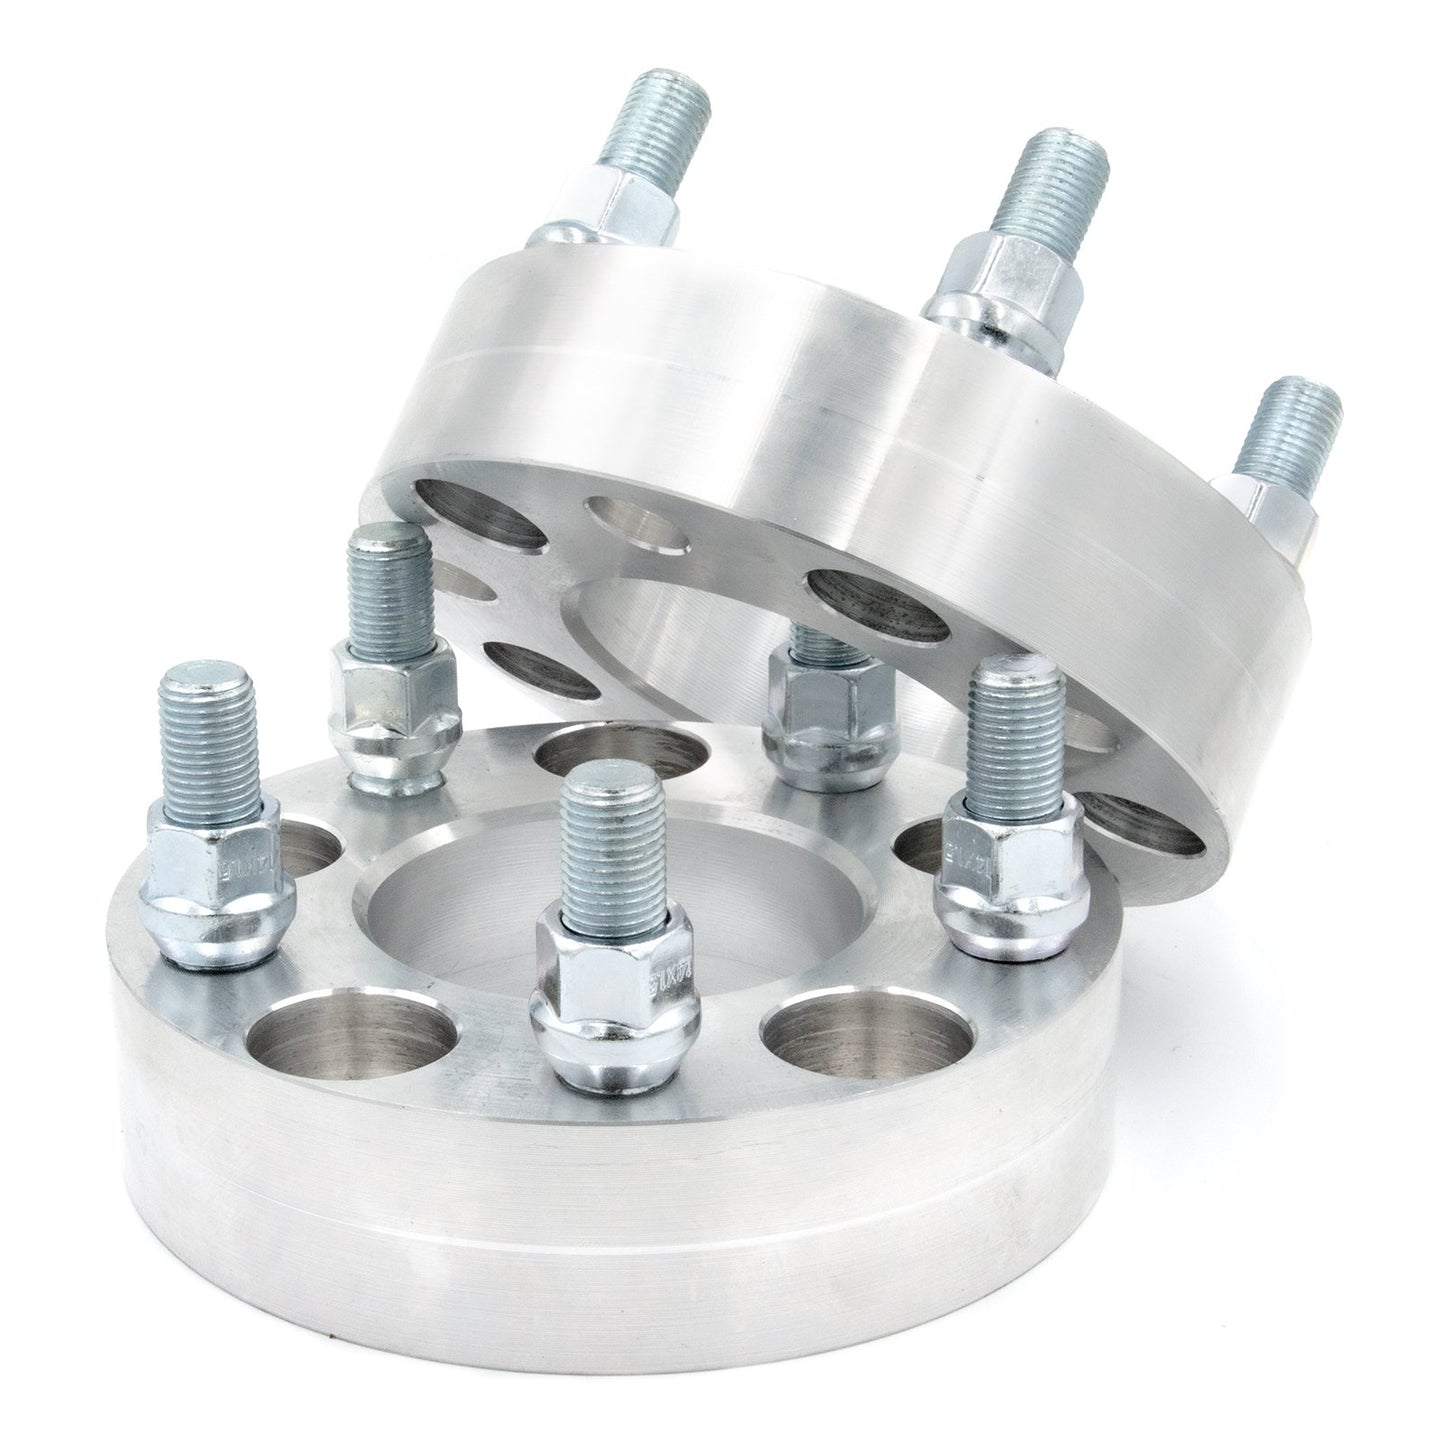 5x4" to 5x4.5" Wheel Spacer/Adapter - Thickness: 3/4"- 4"